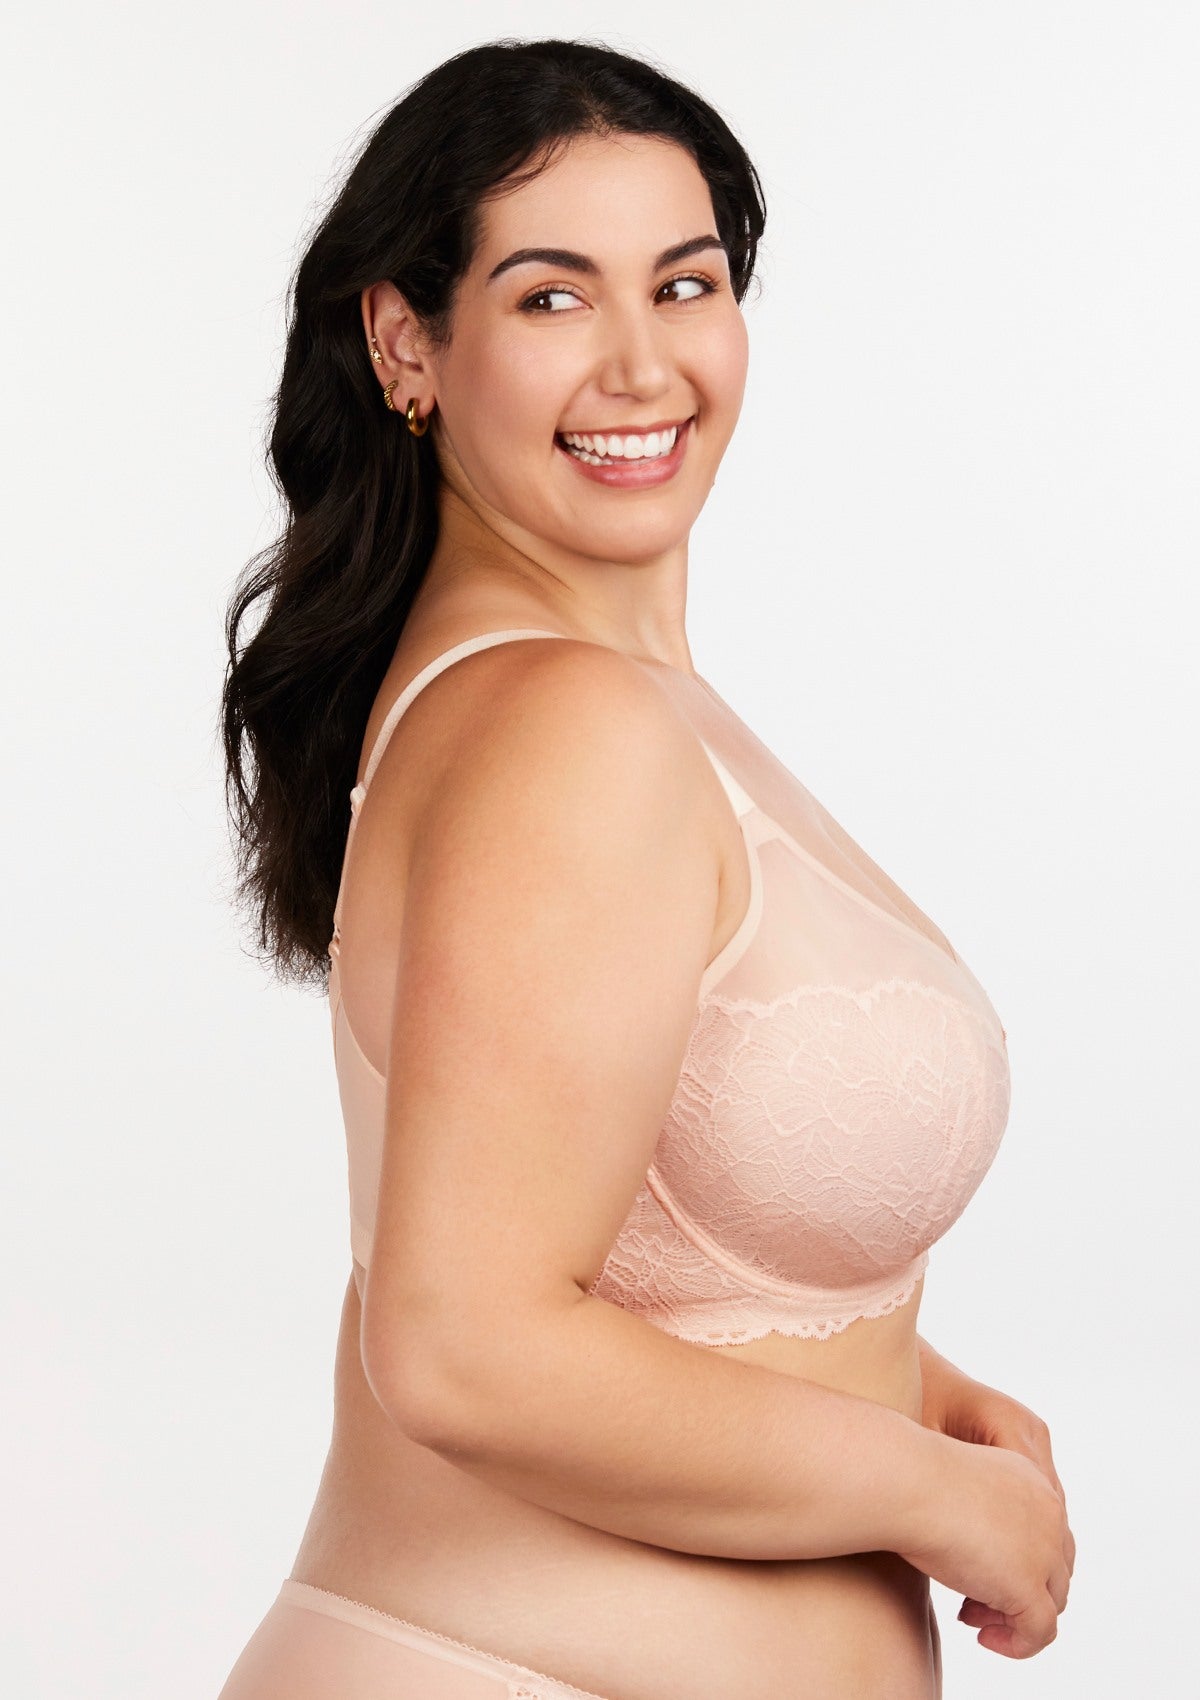 HSIA Blossom Sheer Lace Bra: Comfortable Underwire Bra For Big Busts - Dusty Peach / 38 / D